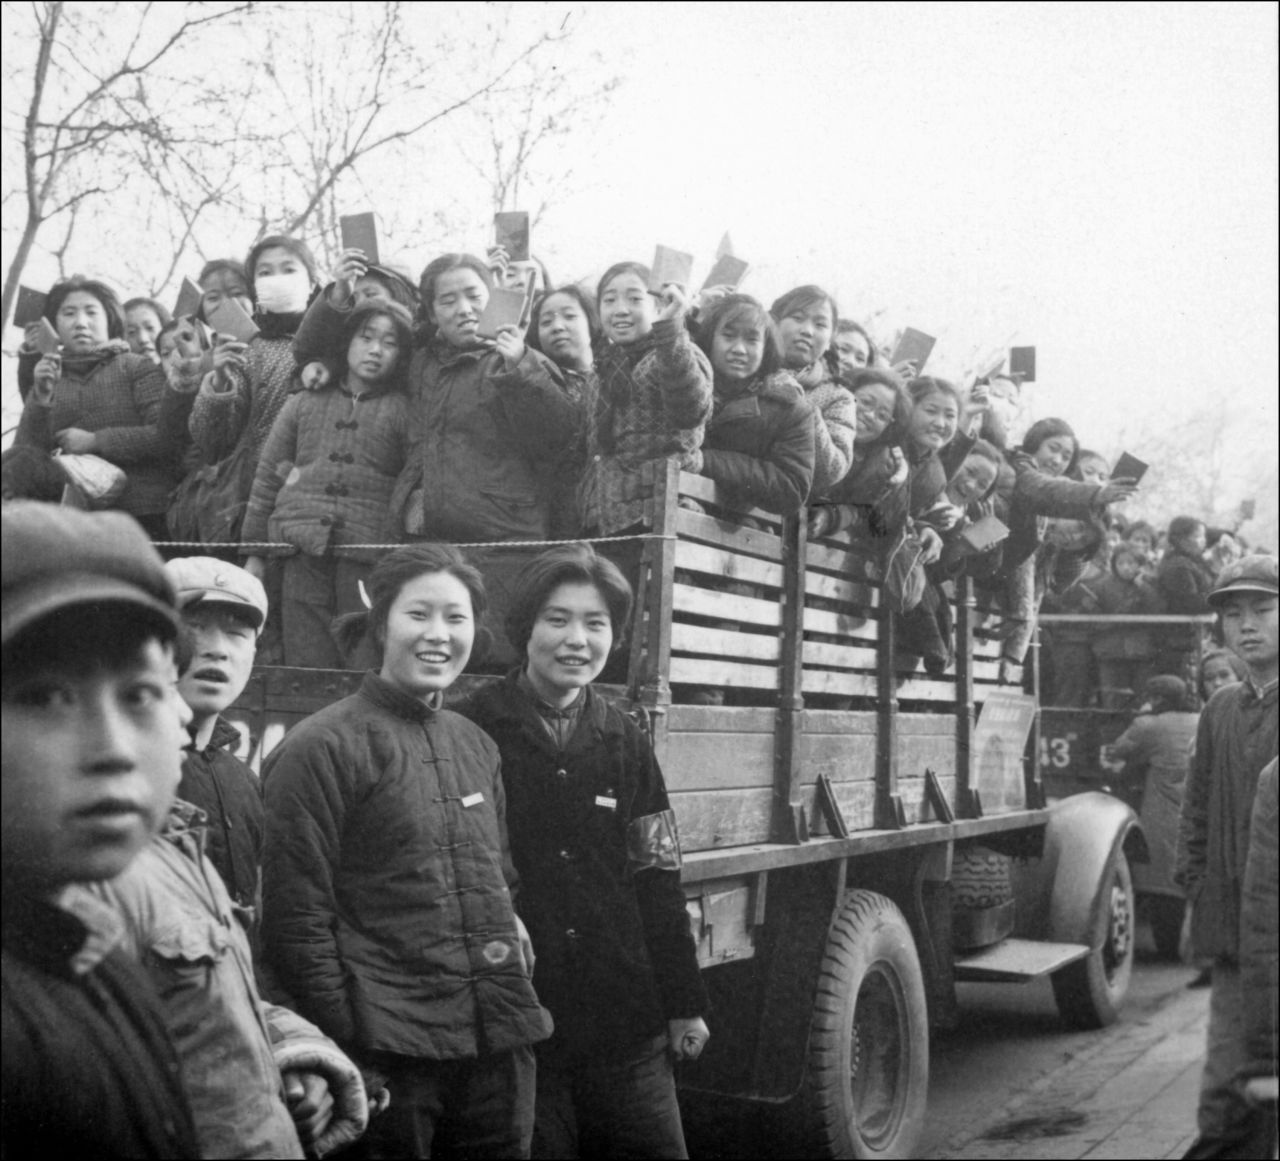 Red Guards, high school and university students, brandish copies of Mao's "Little Red Book." Unleashed on the Party and the populace by Mao himself, the Red Guards went on to rampage throughout the country, terrorizing, killing and torturing people deemed "class enemies."